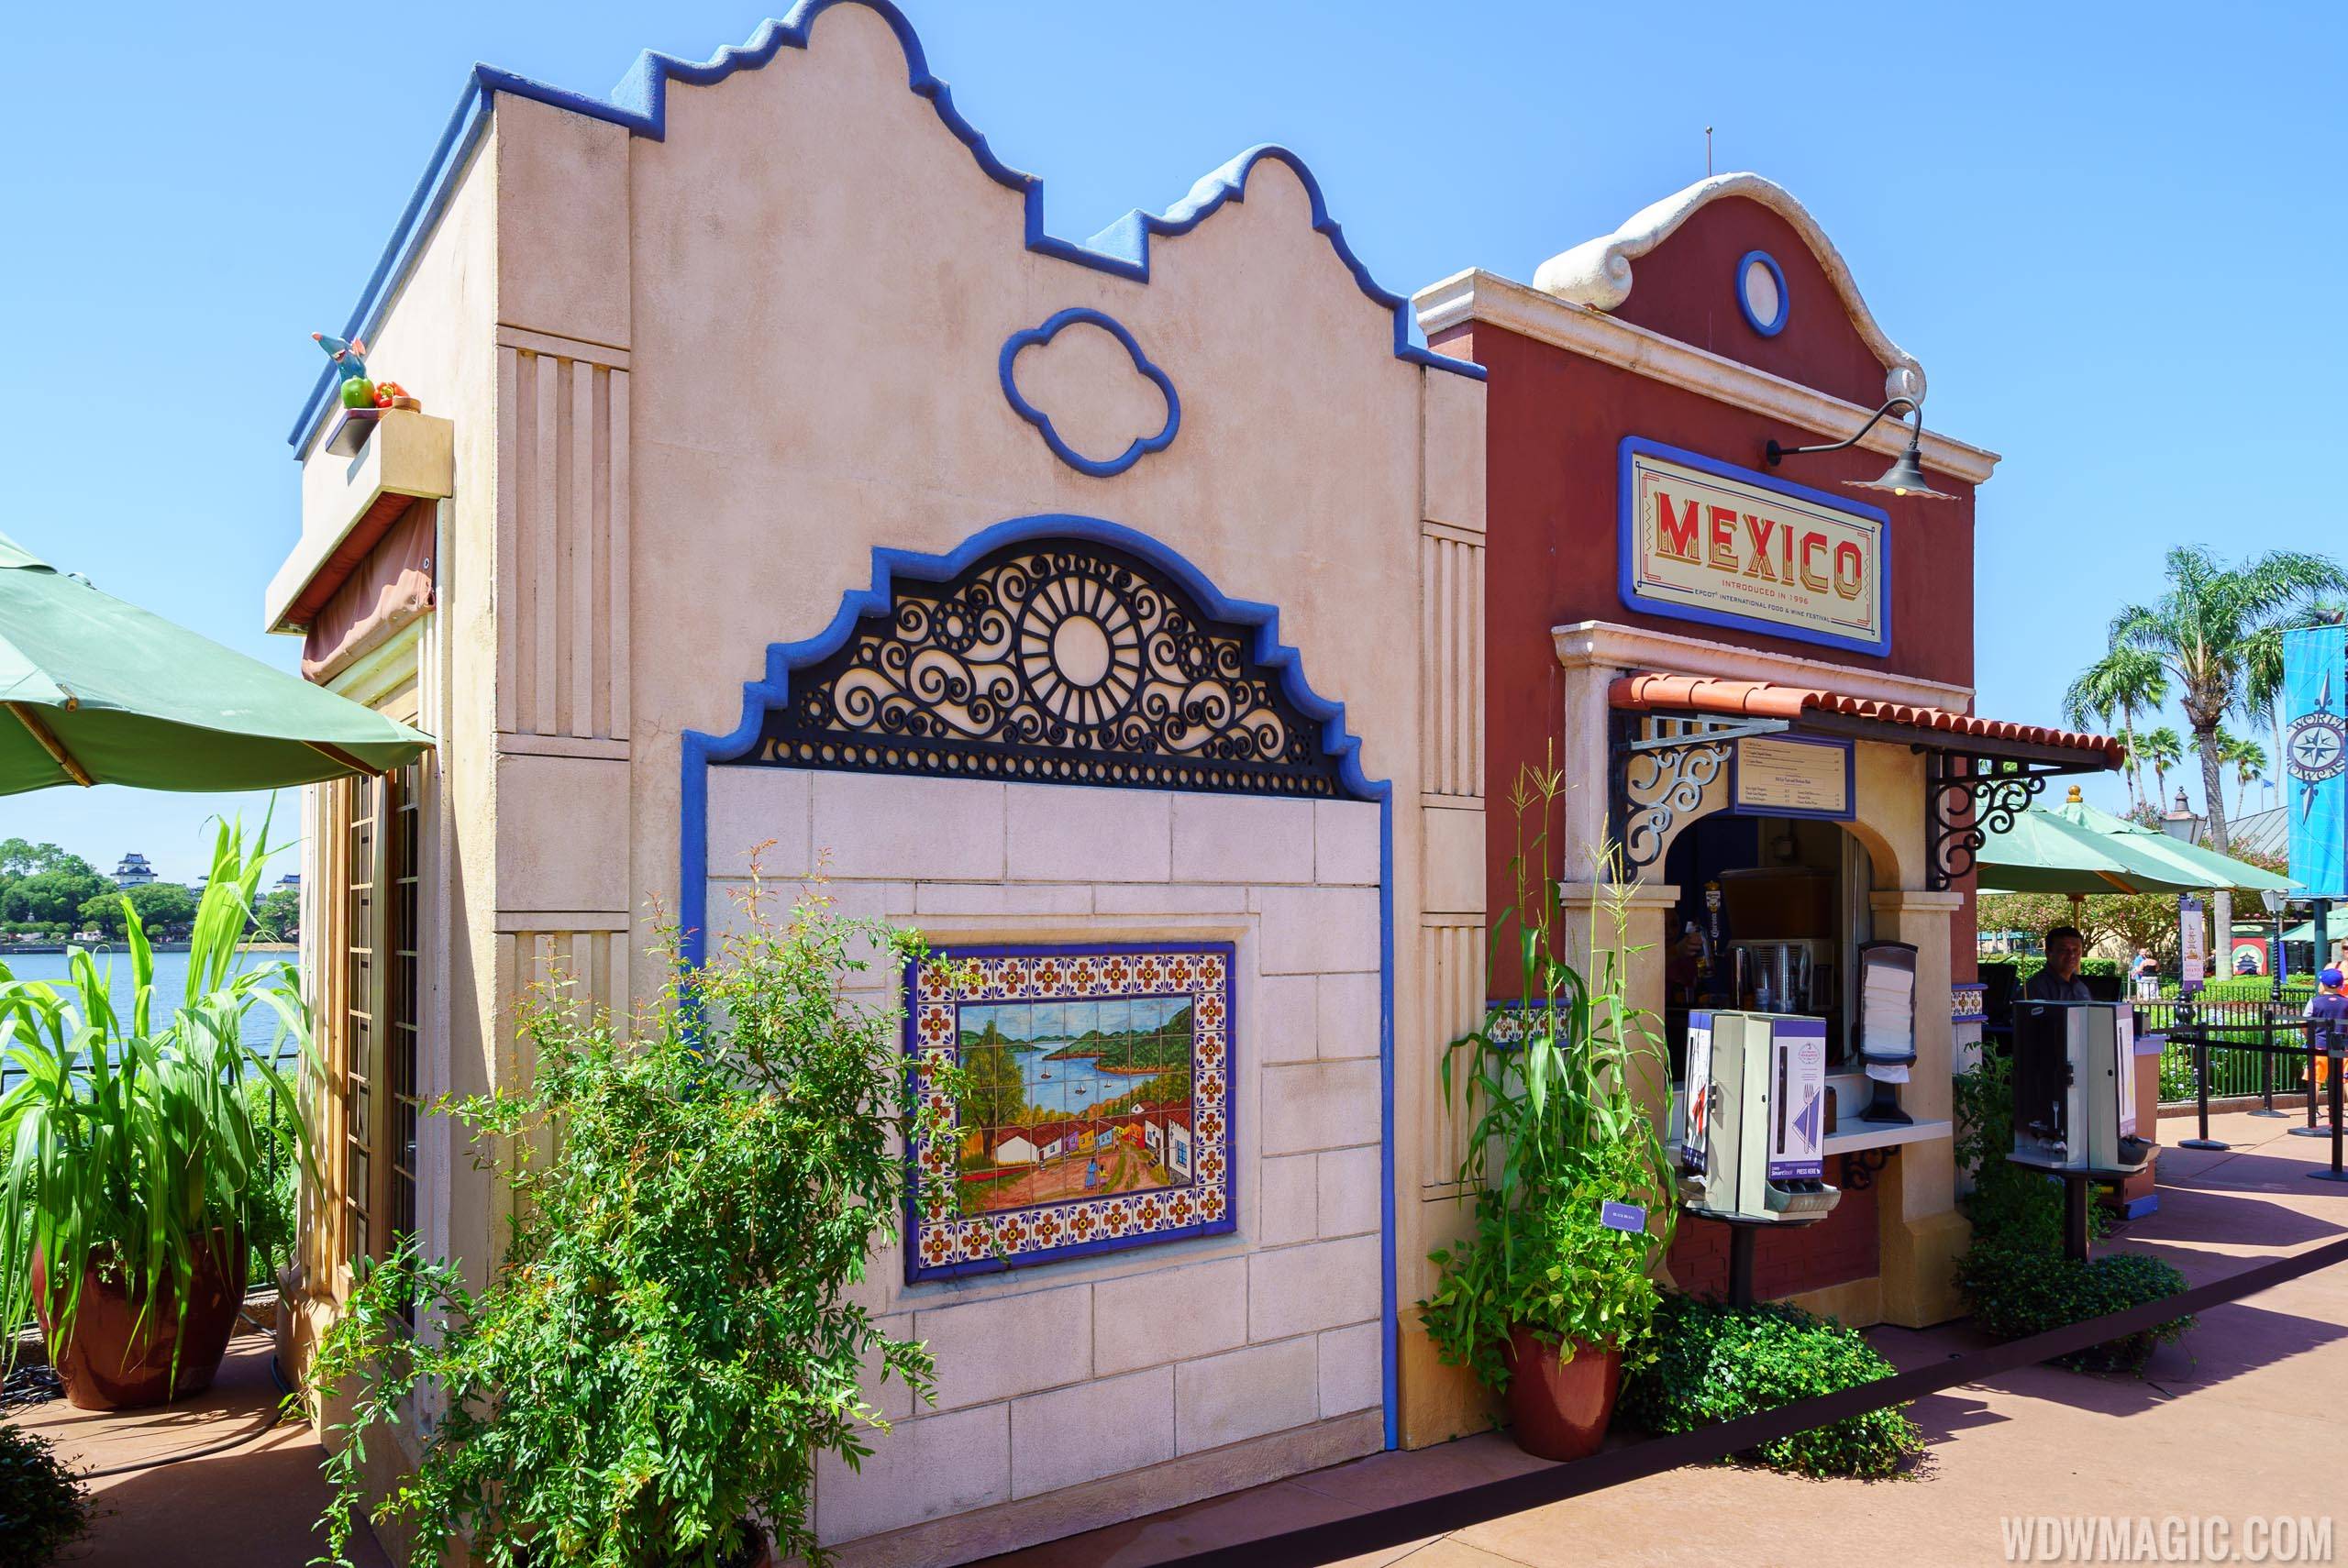 2017 Epcot Food and Wine Festival - Mexico marketplace kiosk